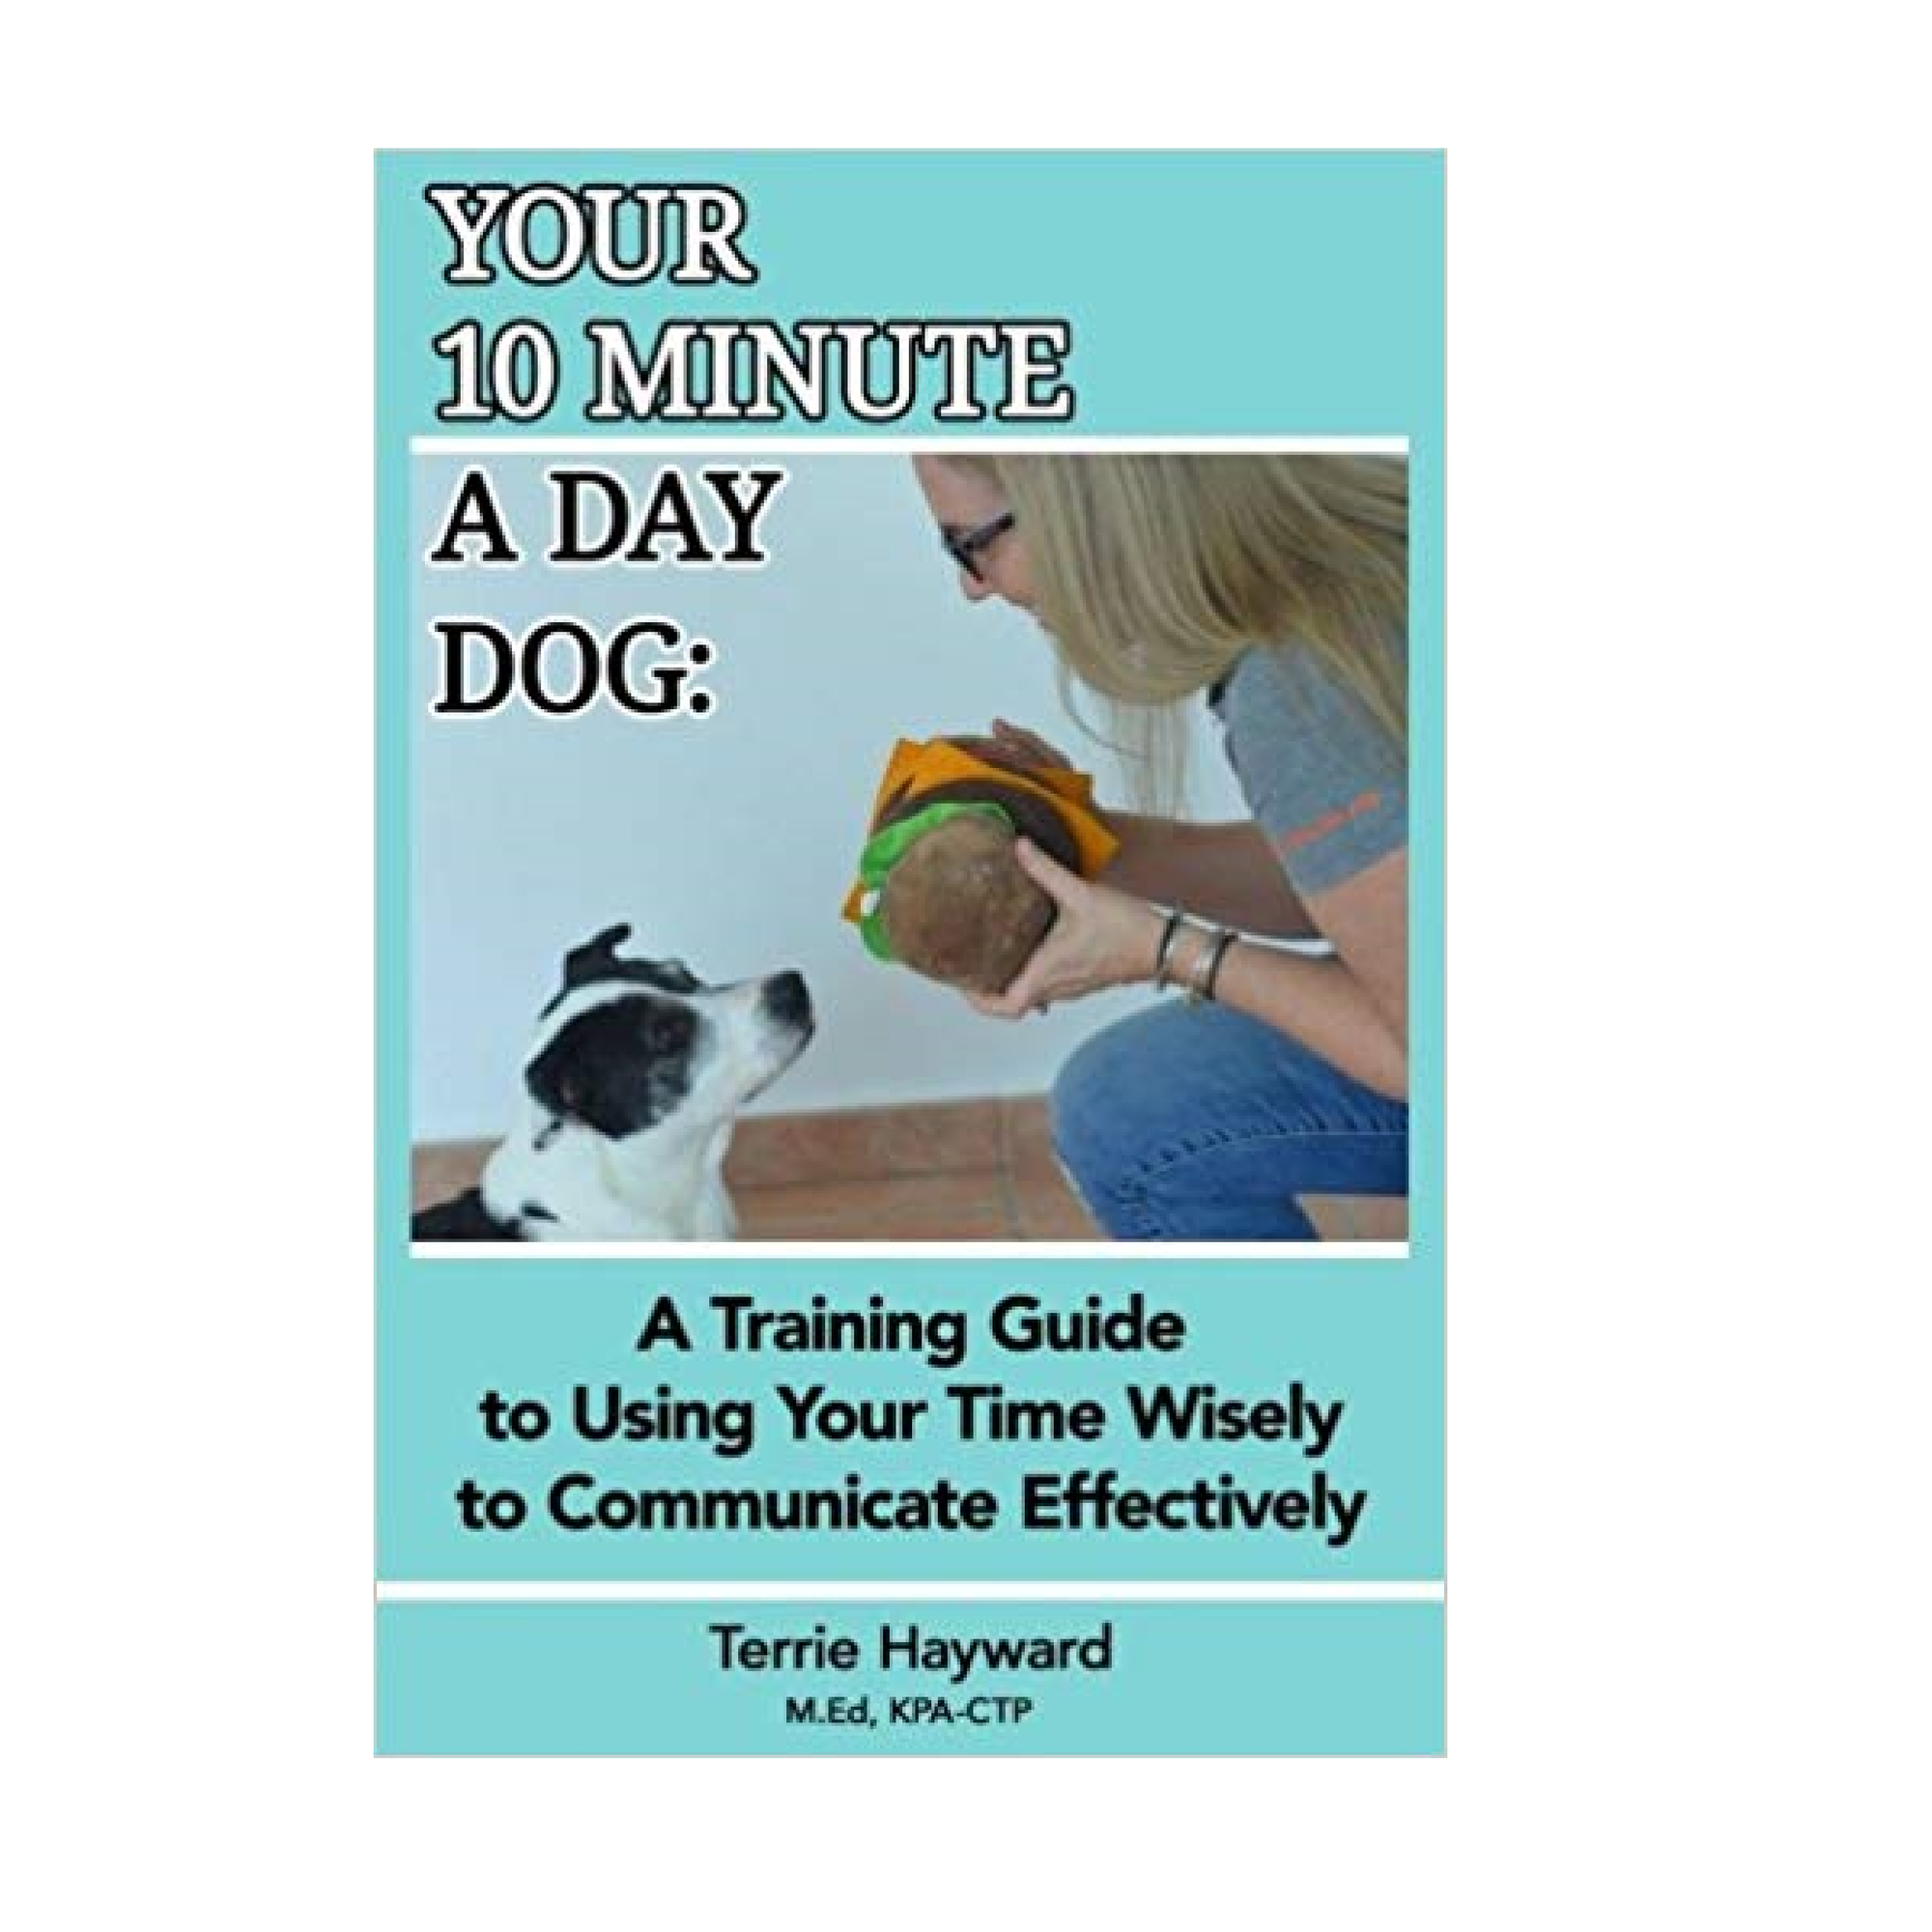 Your 10 Minute a Day Dog: A Training Guide to Using Your Time Wisely to Communicate Effectively by Terrie Hayward